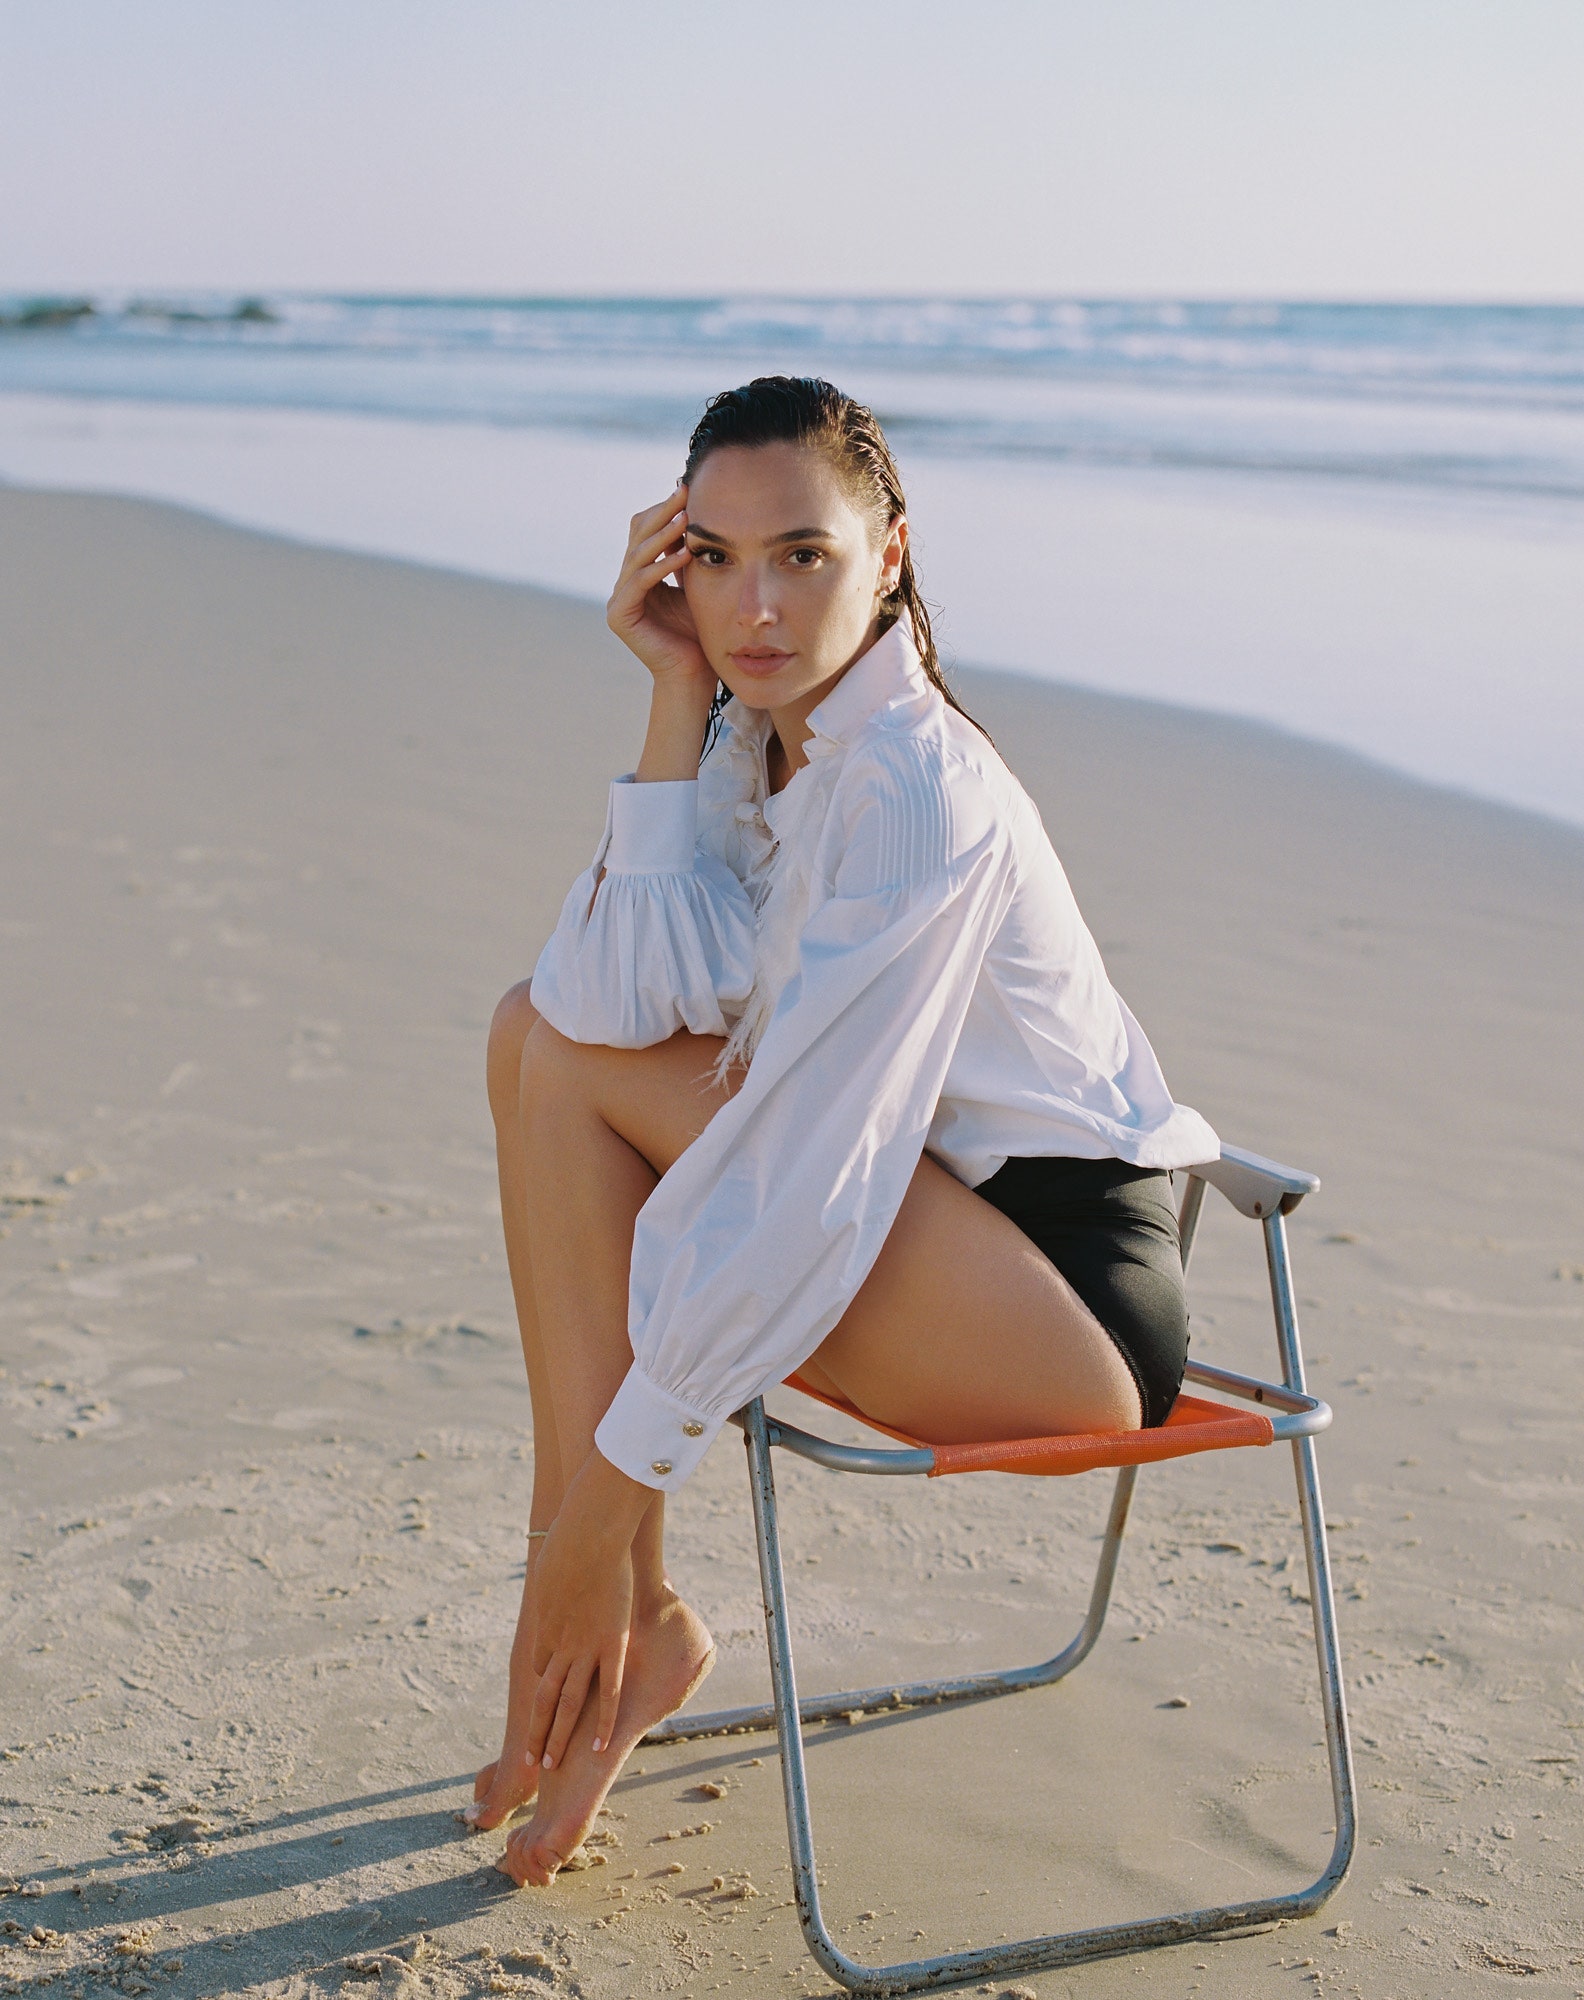 Gal Gadot Img Models She won the miss israel title in 2004 and went on to represent israel at the 2004 gadot is known for her role as gisele in the fast and the furious film series. gal gadot img models